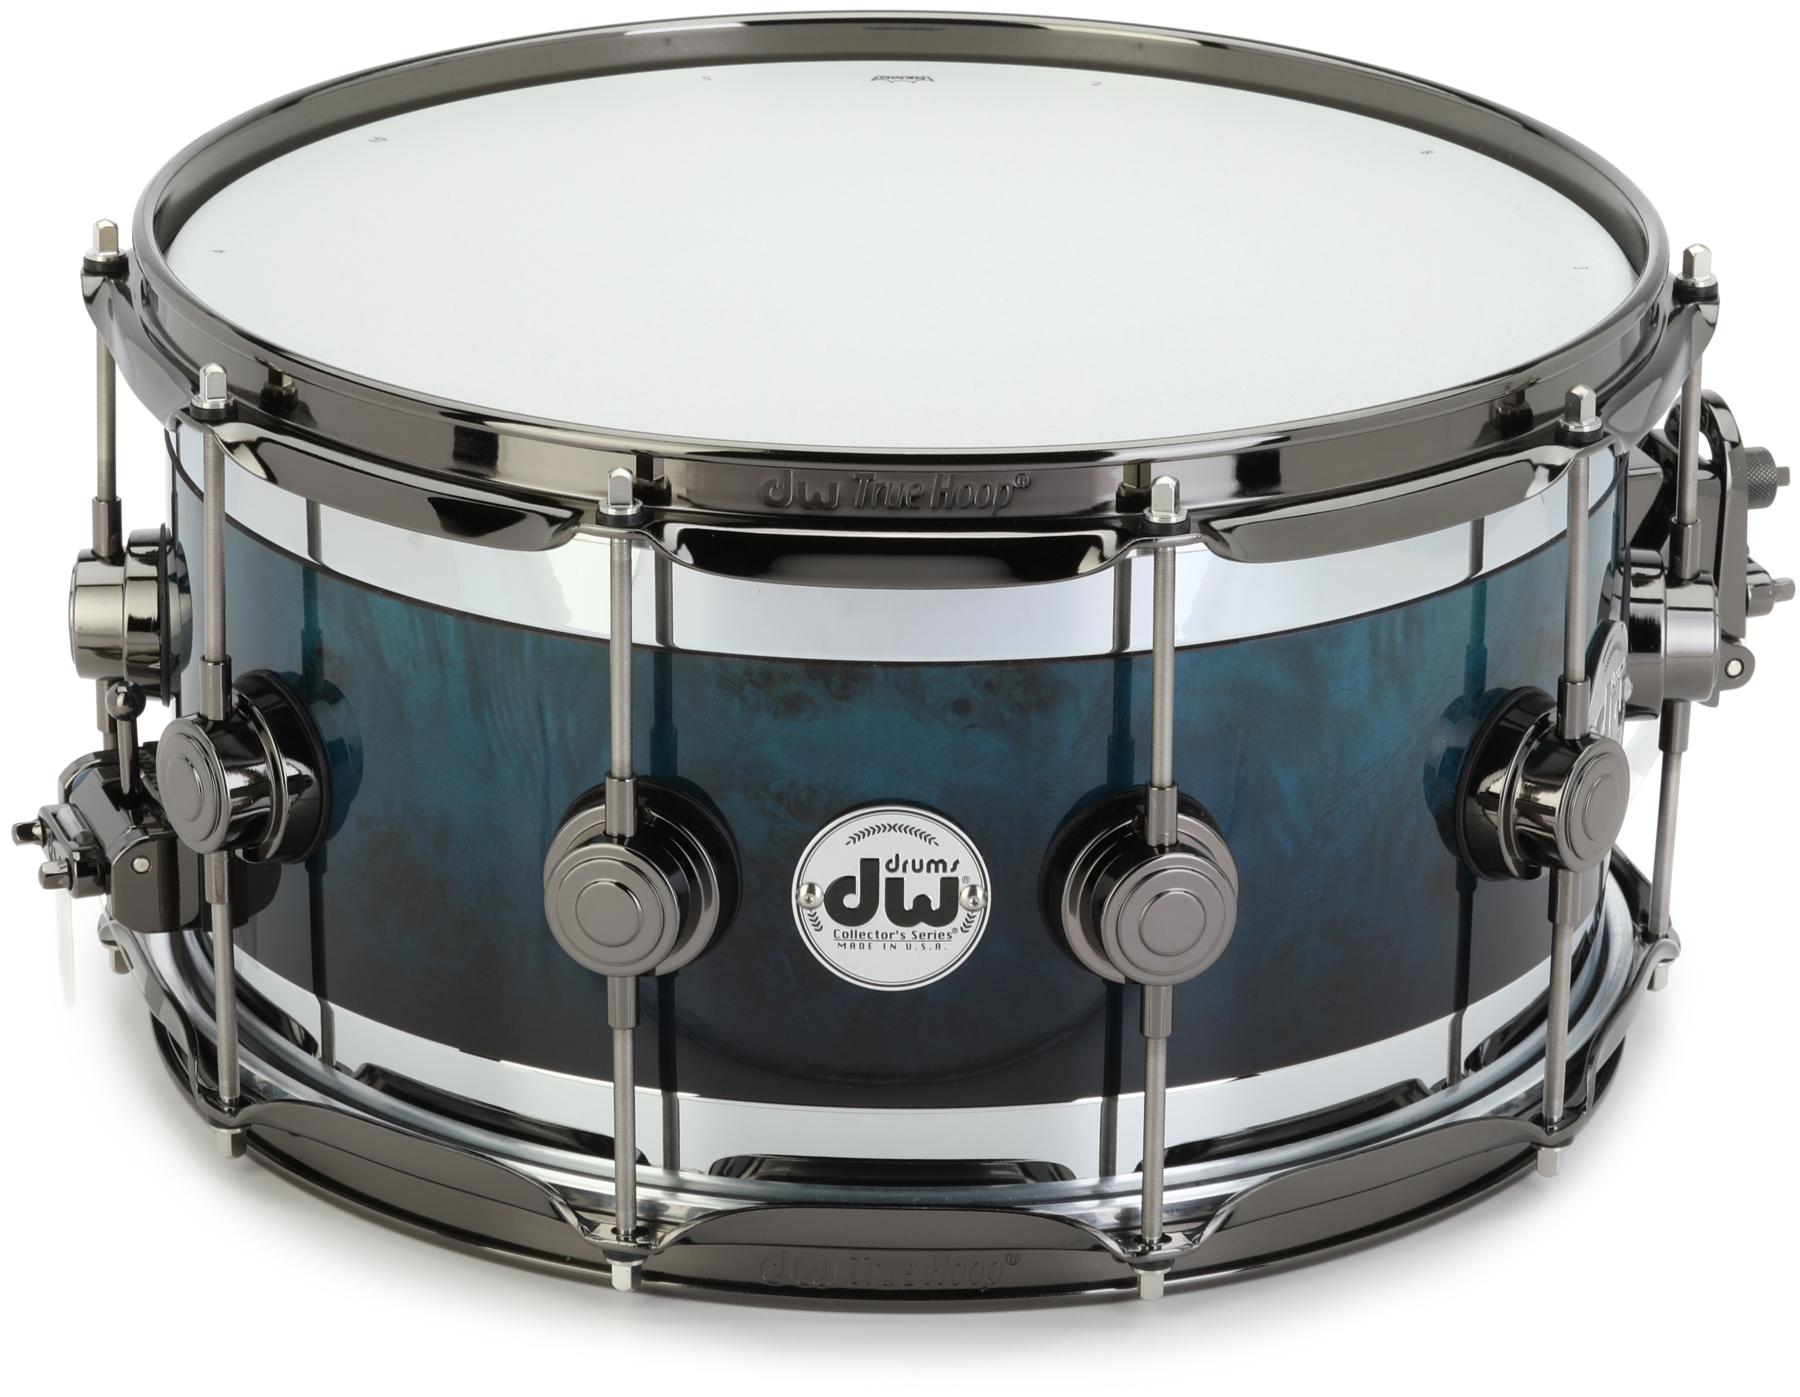 blue snare drum   Sweetwater